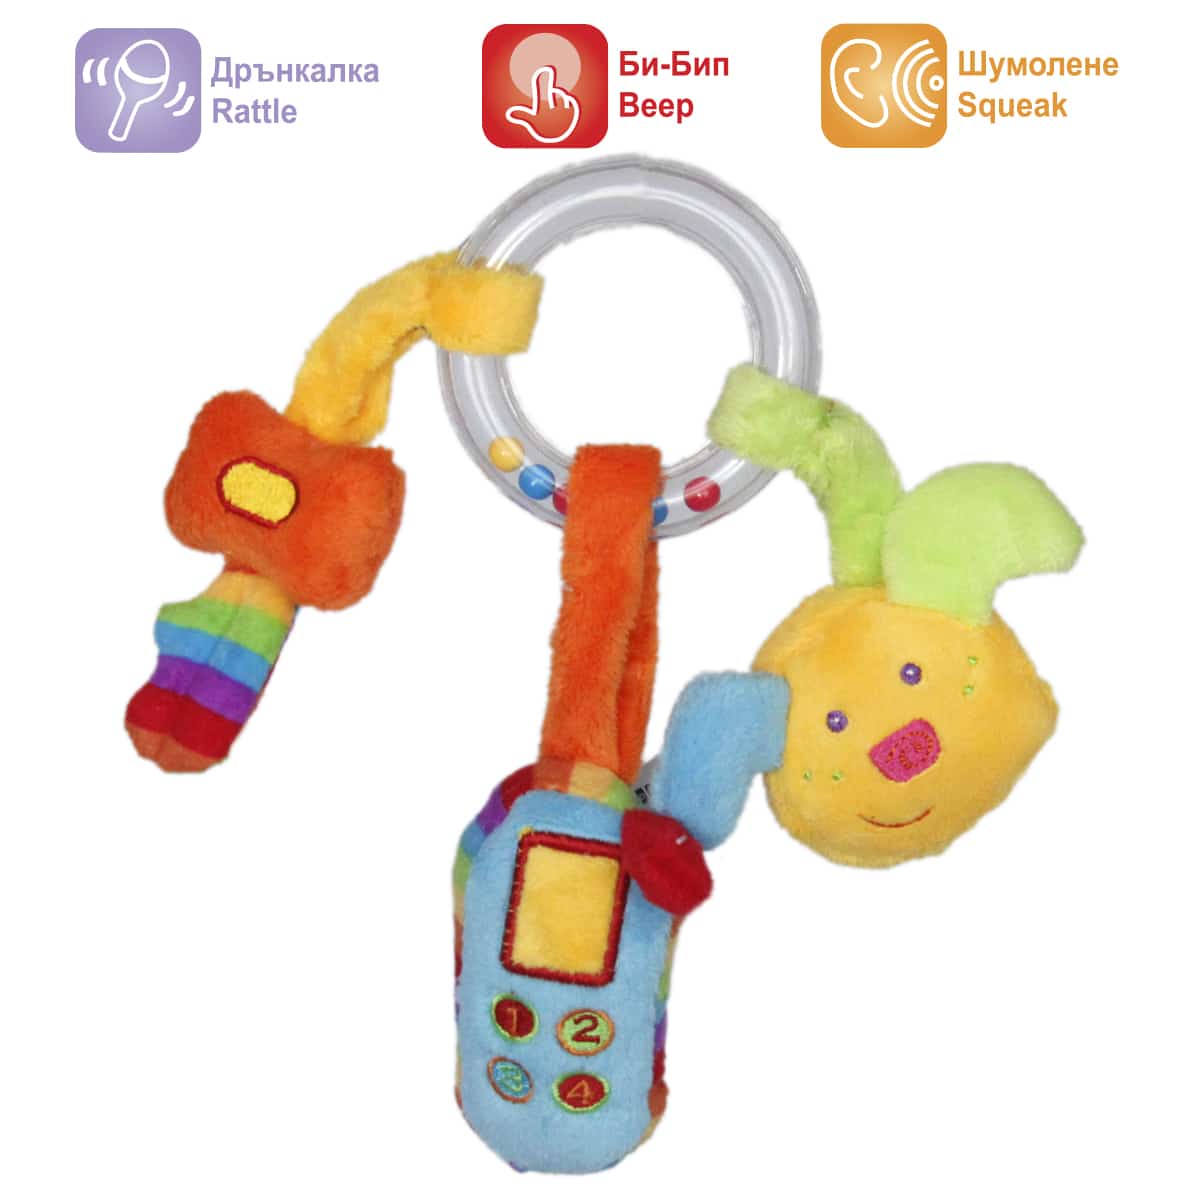 Baby rattle with three accessories